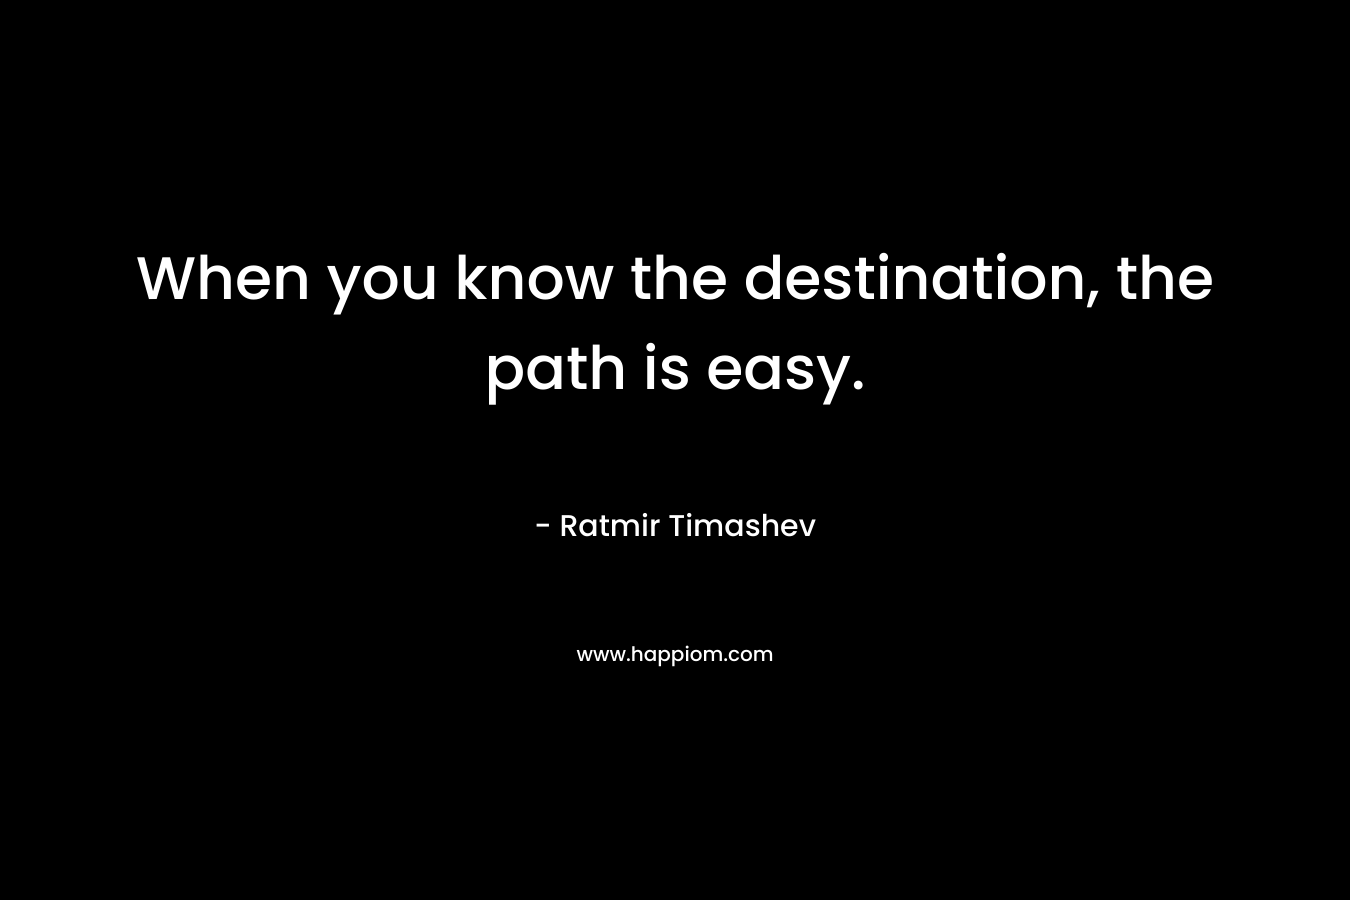 When you know the destination, the path is easy. – Ratmir Timashev